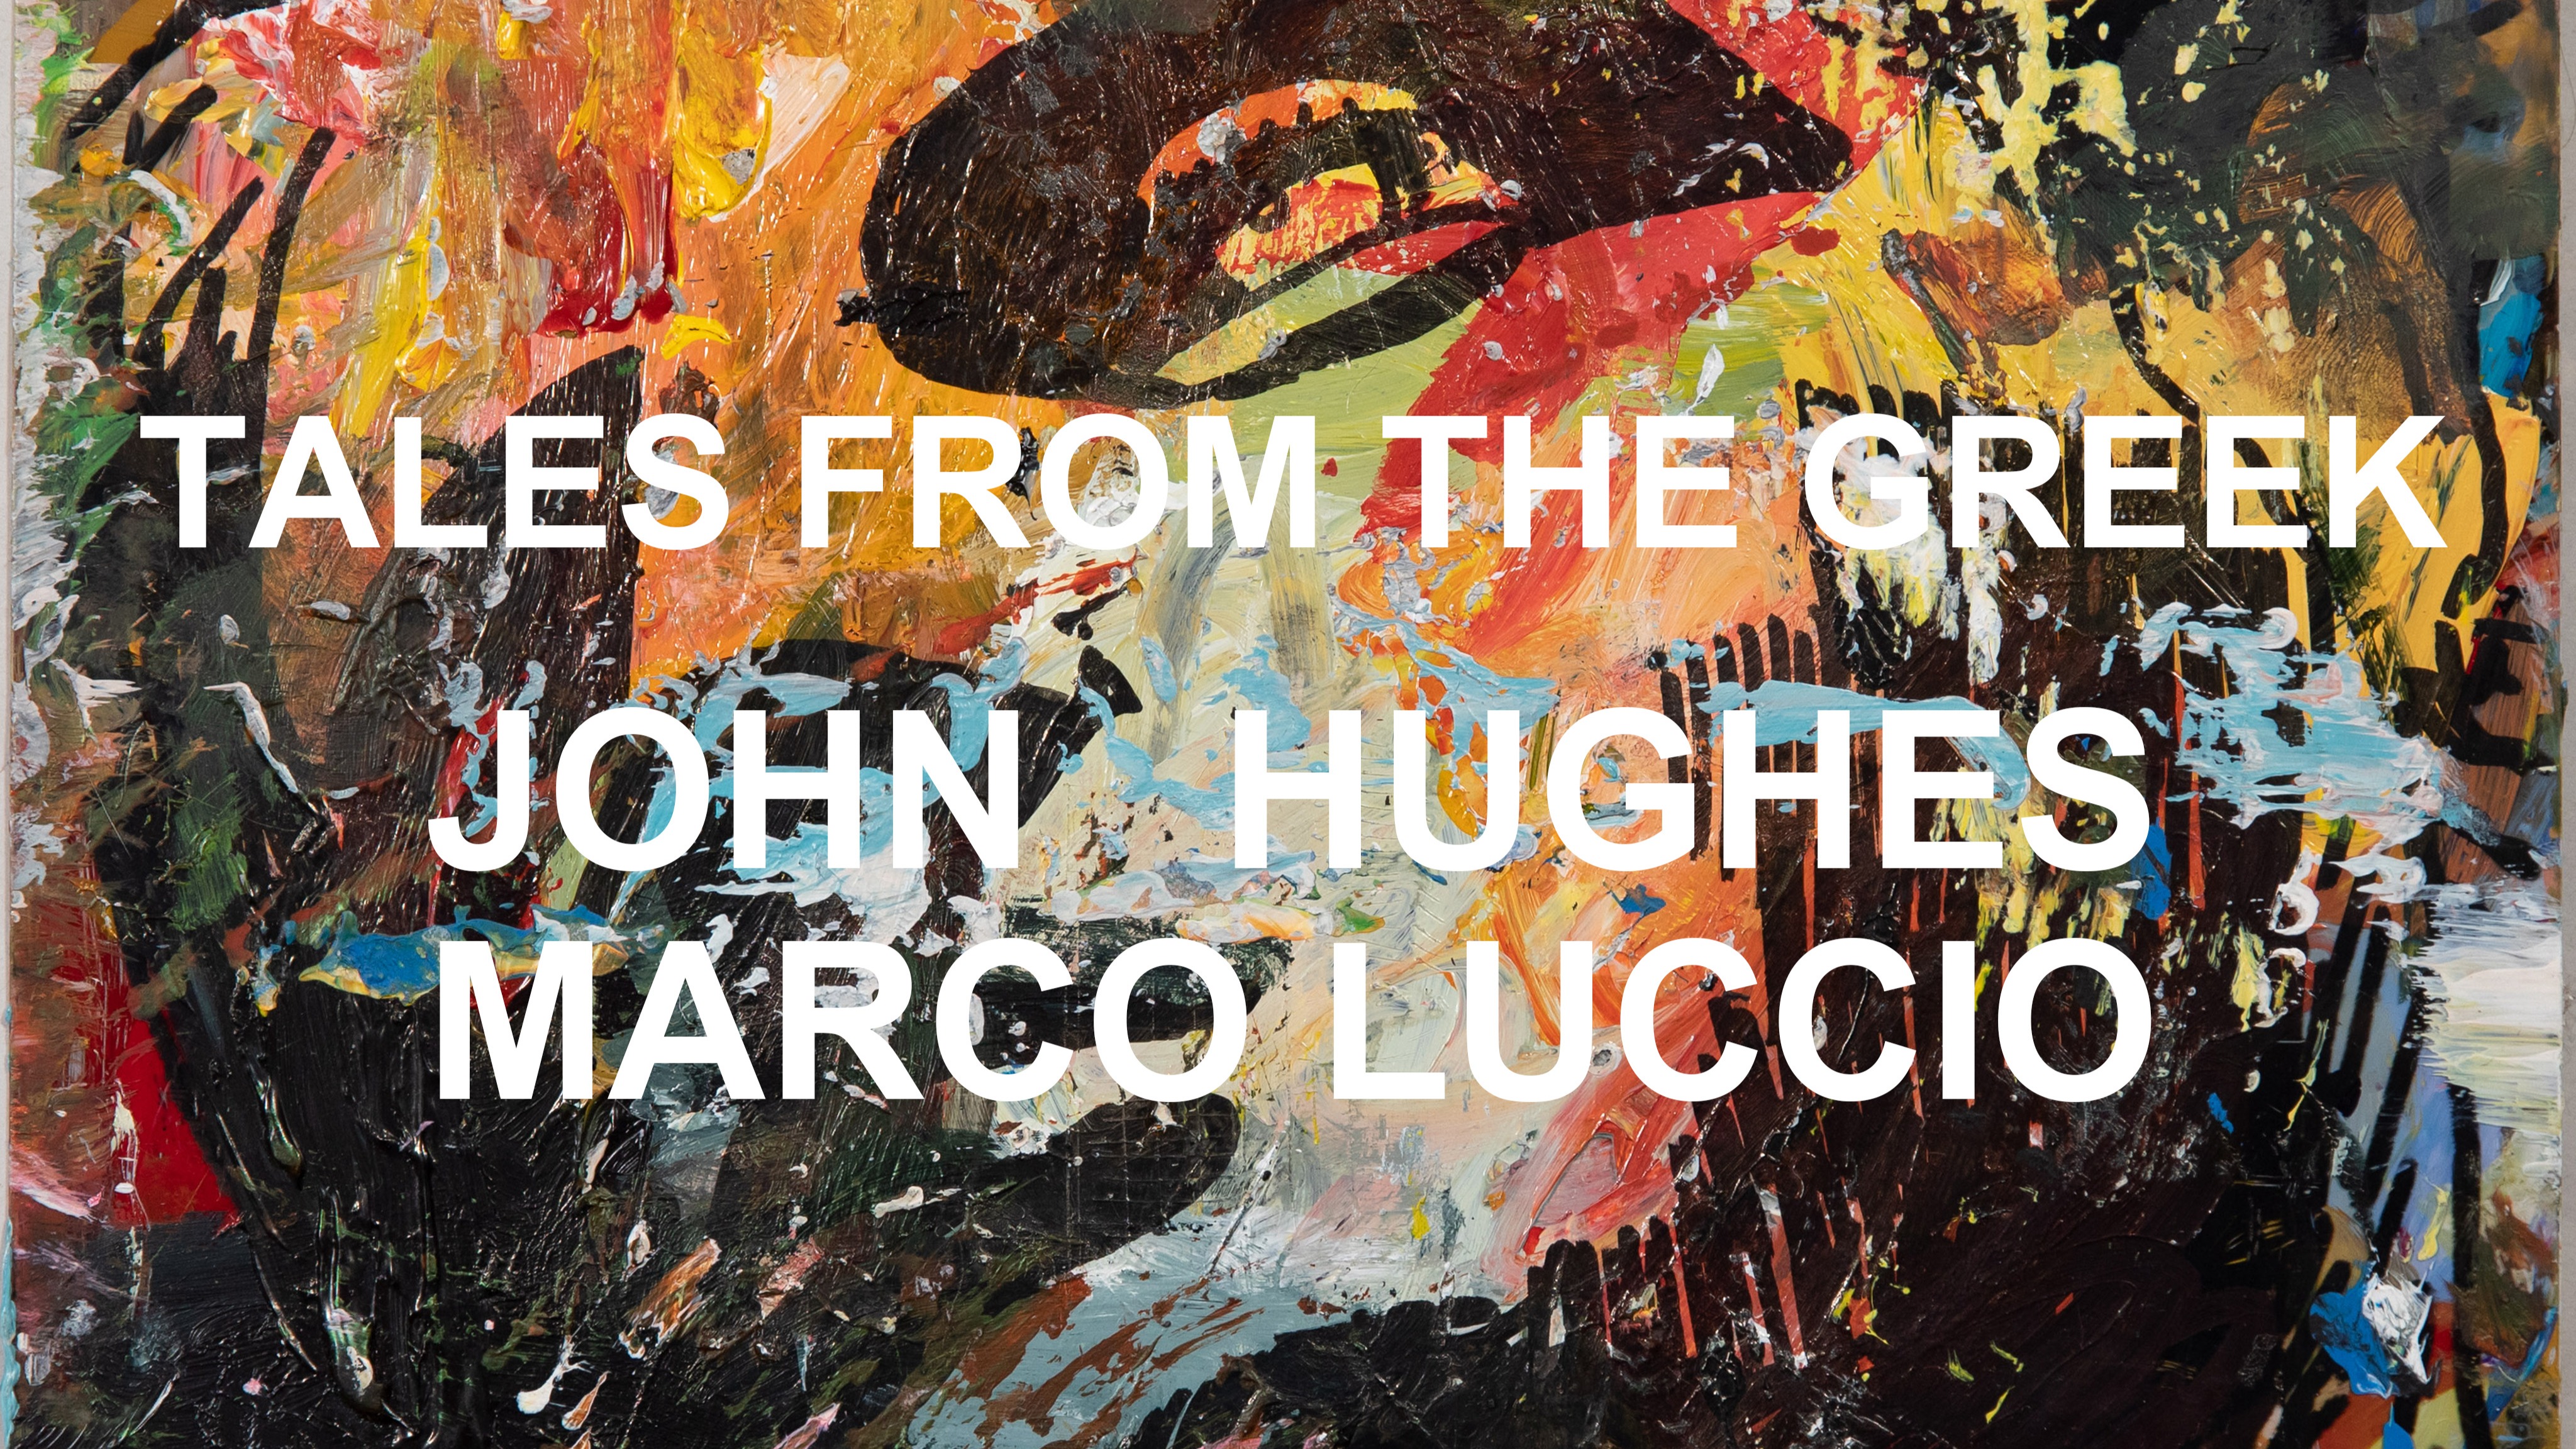 Reading, Live Drawing and Q&A with John Hughes and Marco Luccio